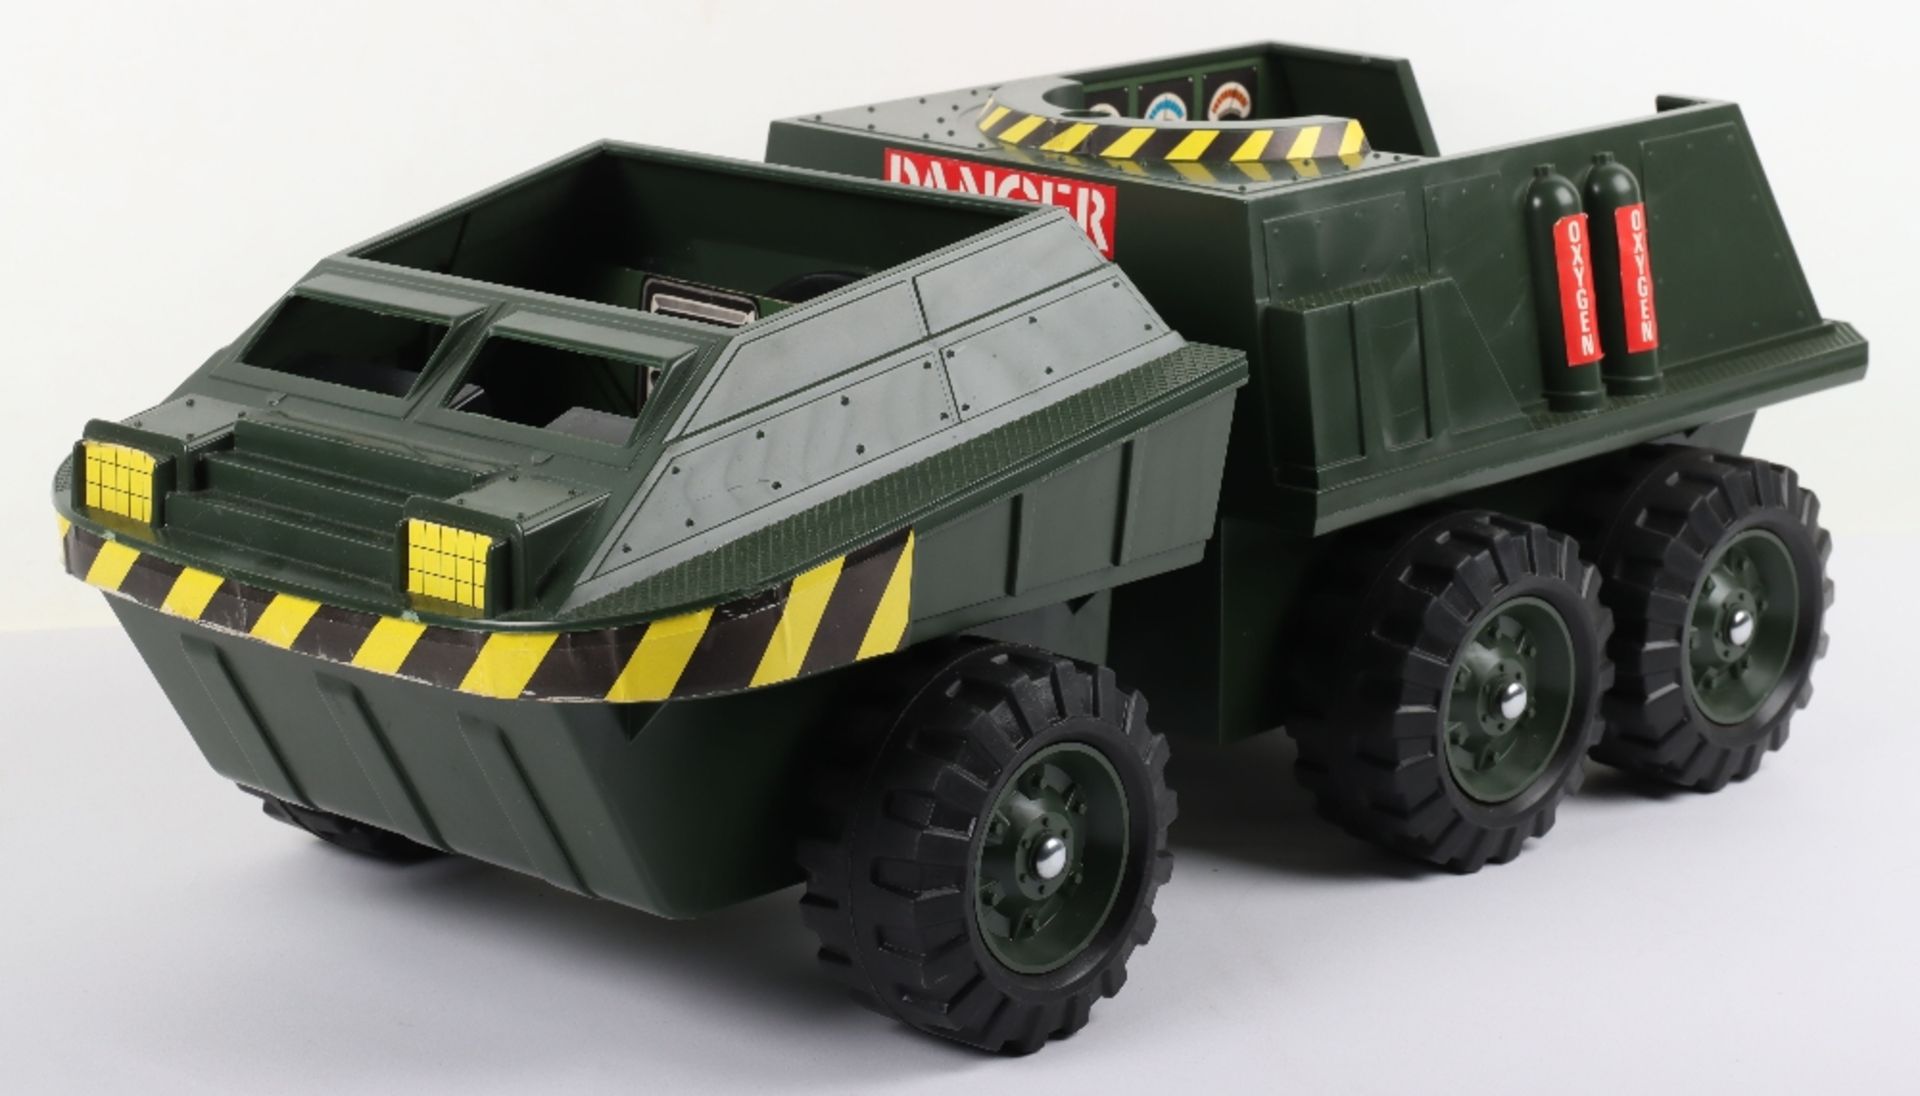 Boxed Original Palitoy Action Man Transport Command Multi-Terrain Vehicle - Image 5 of 9